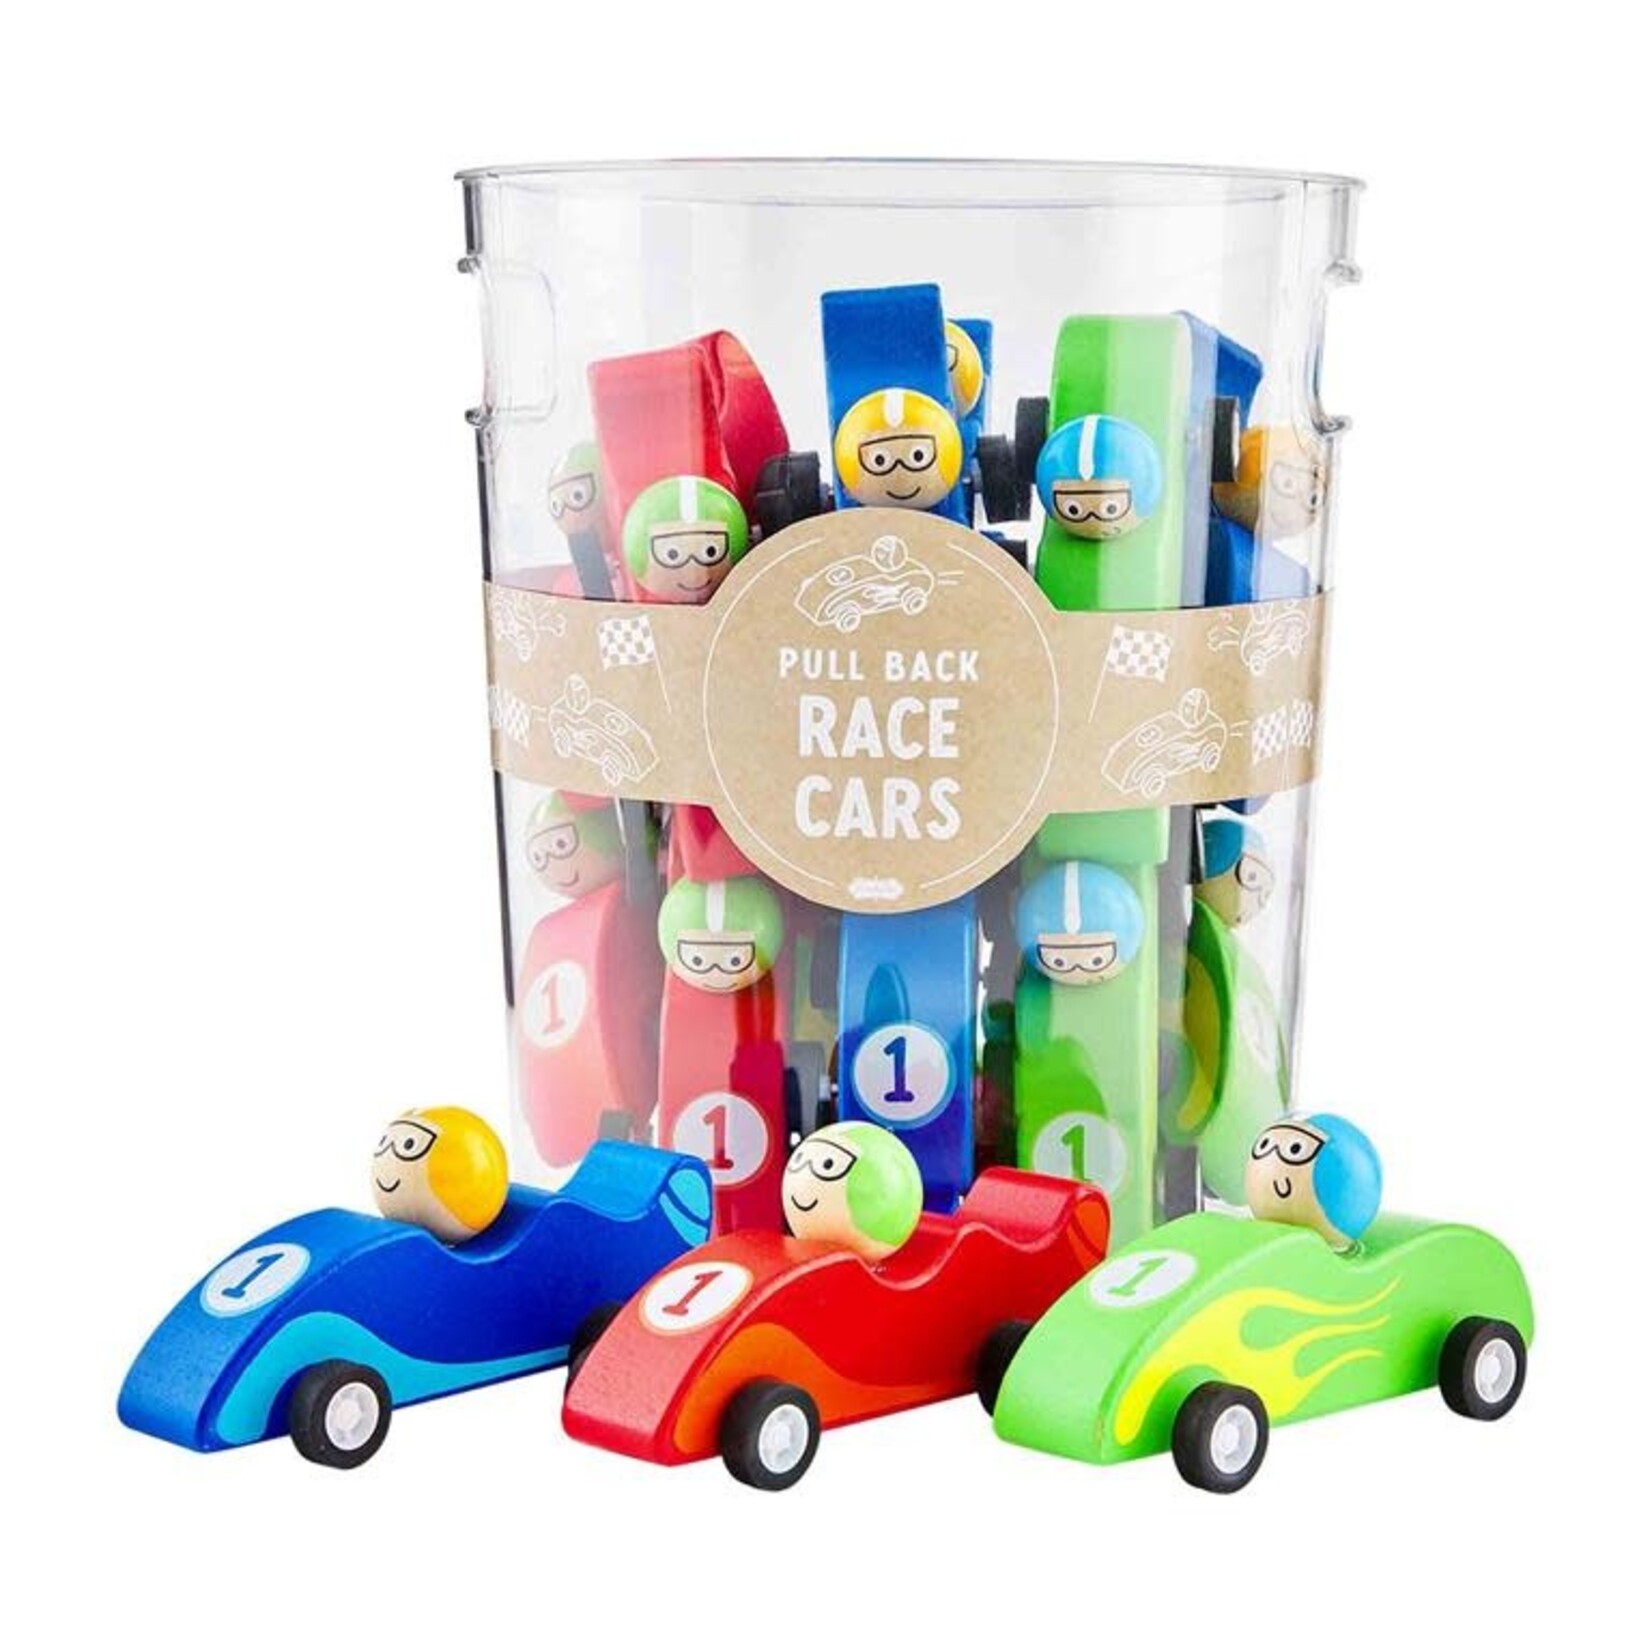 Mud Pie Wooden Pull Back Race Cars